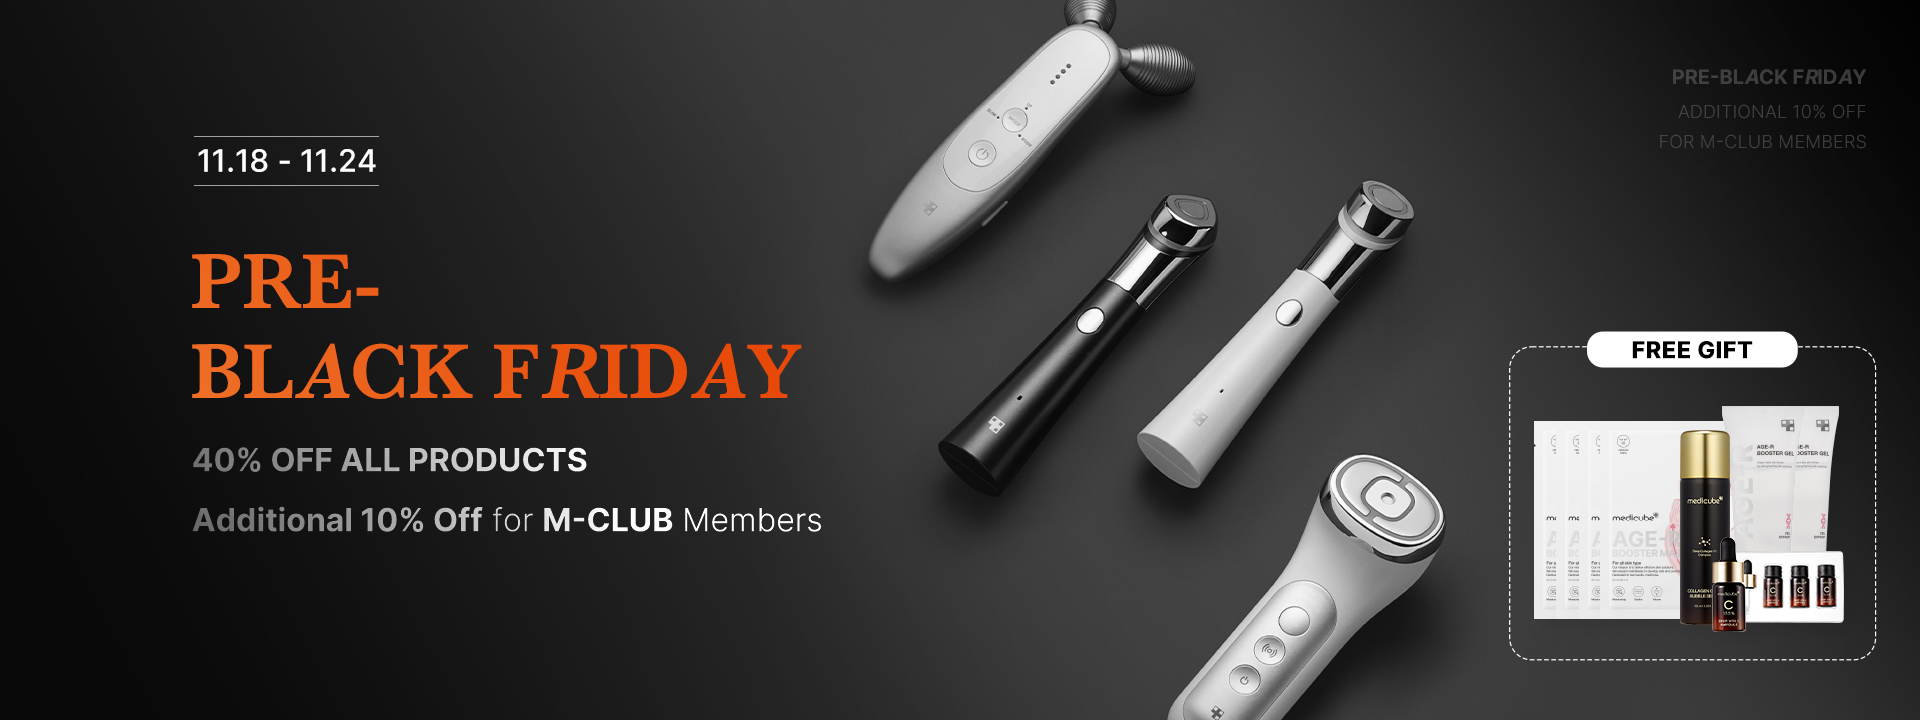 R L W3 PRE- BLACK FRIDAY 0% OFF ALL PRODUCTS litional 10% Off for M-CLUB Members o FREEGIFT Jumams 